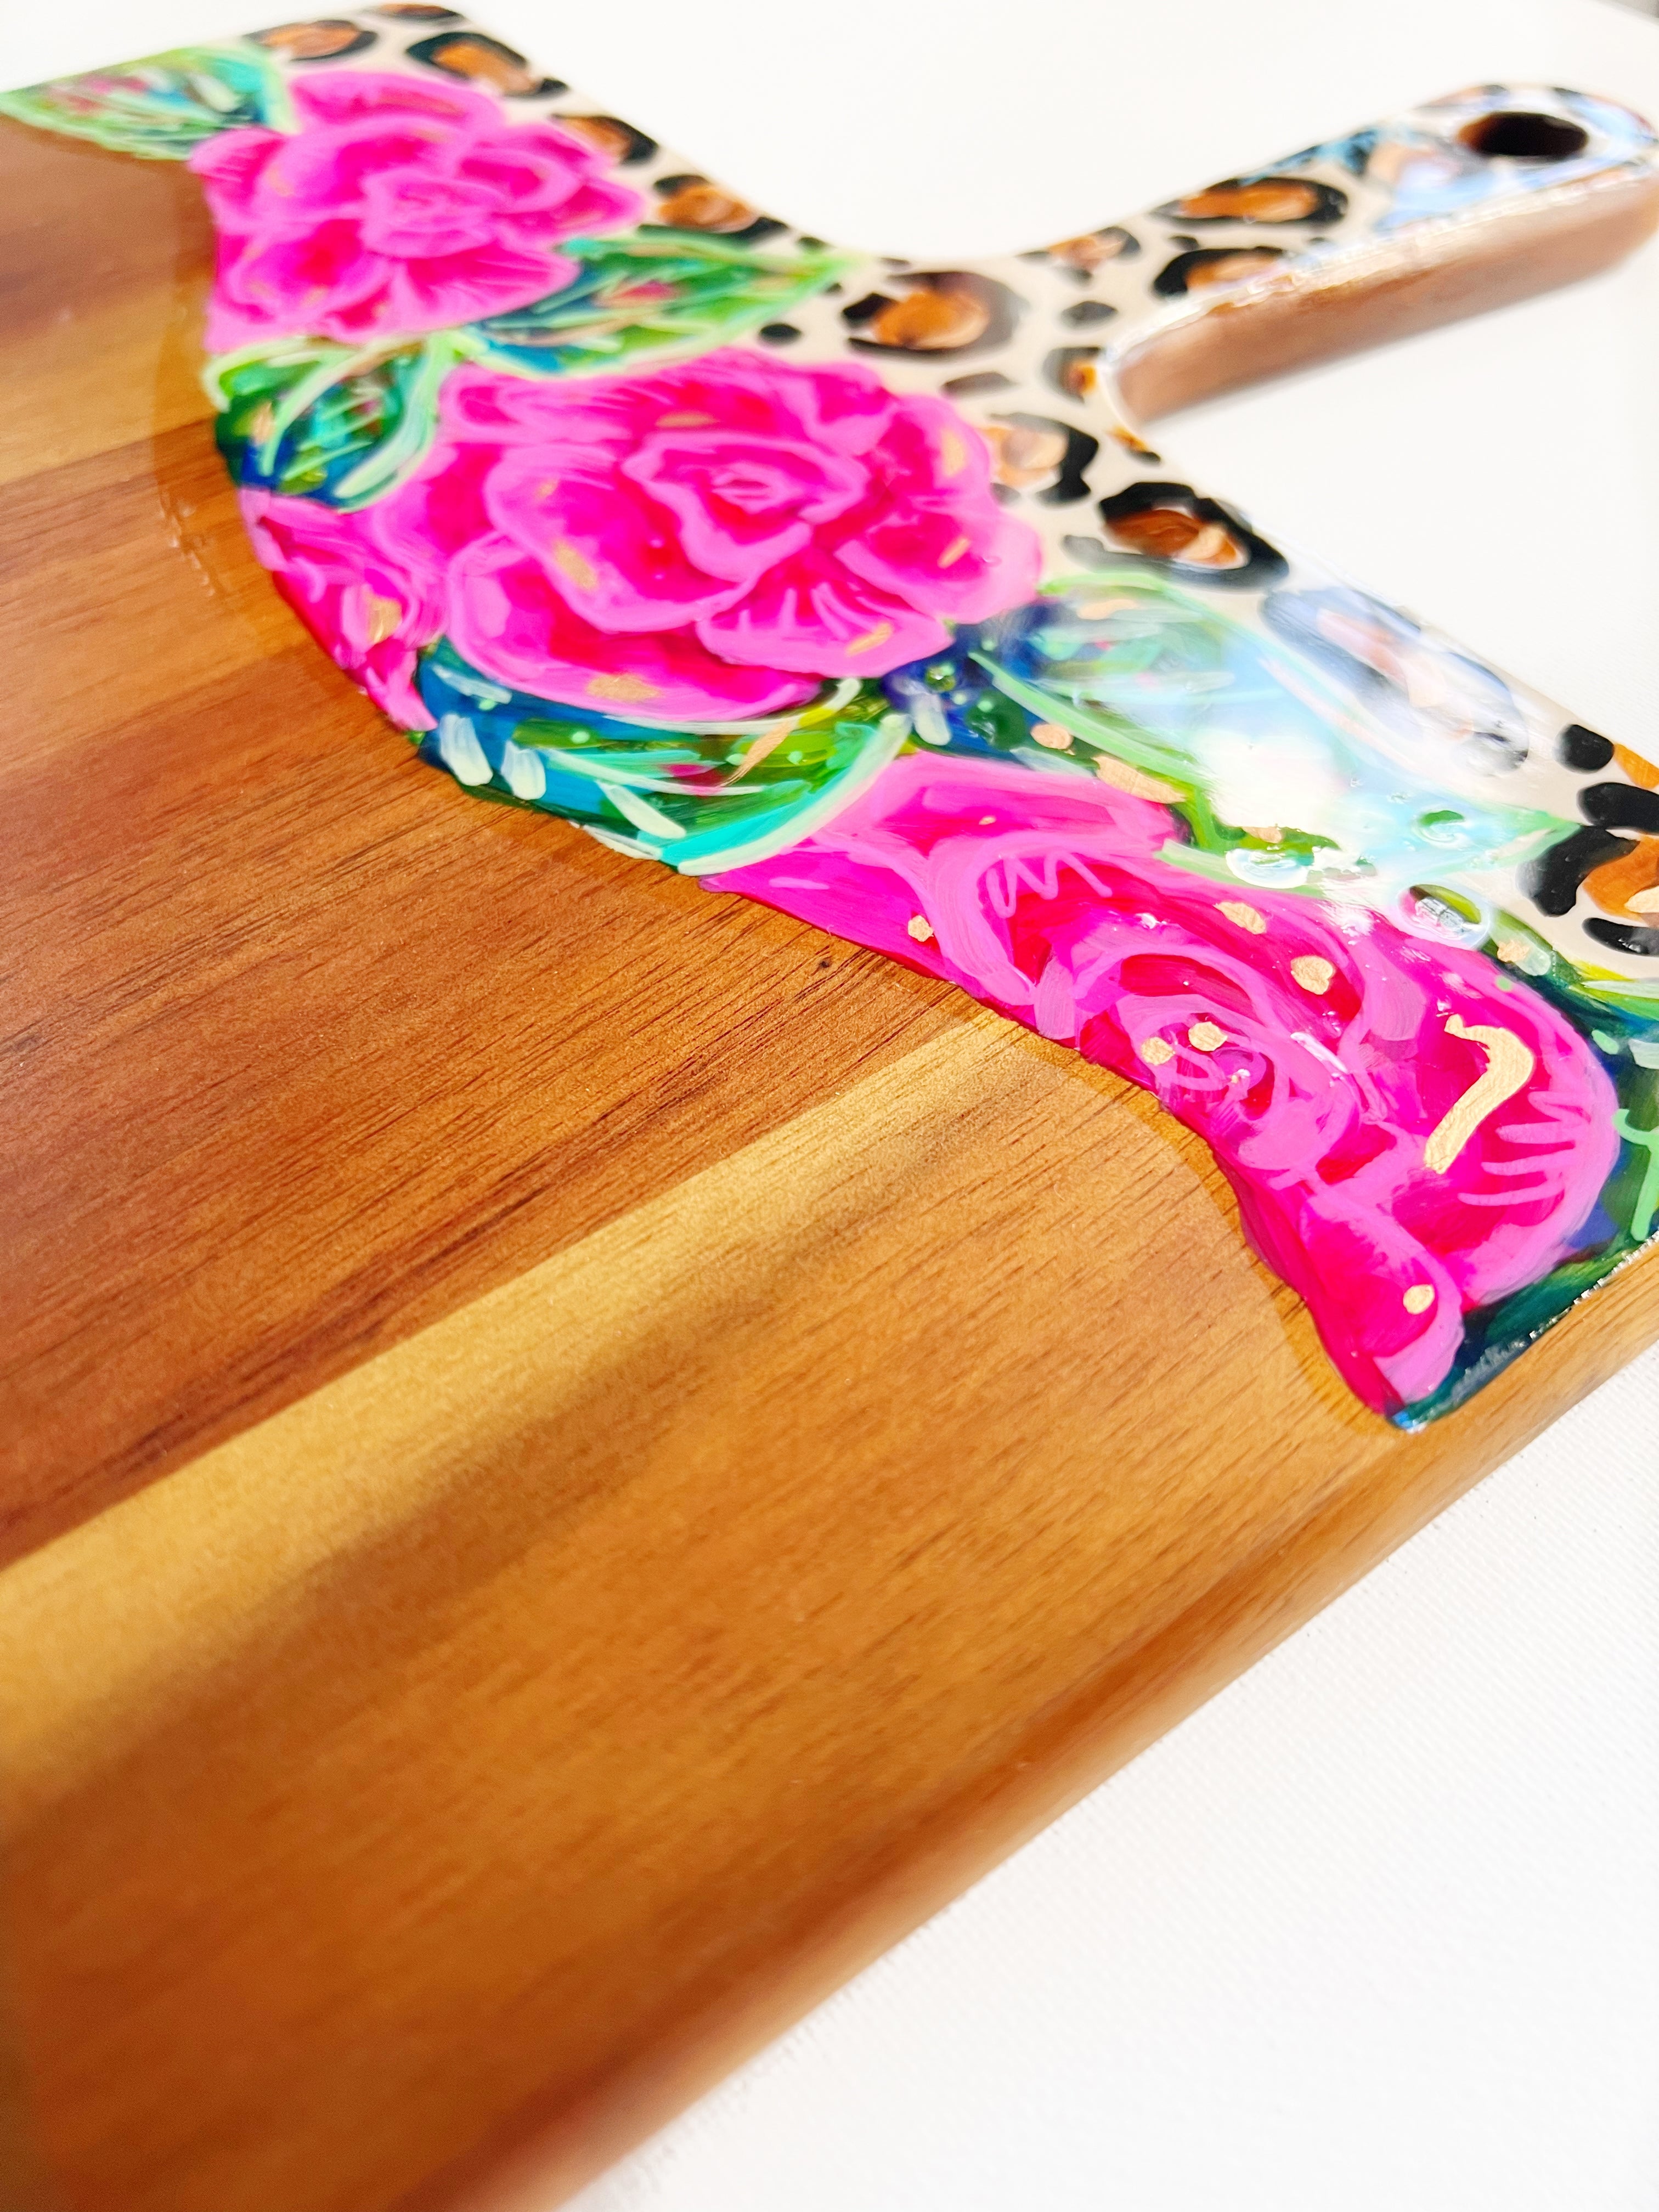 Cutting Board - Roses and Leopard Print